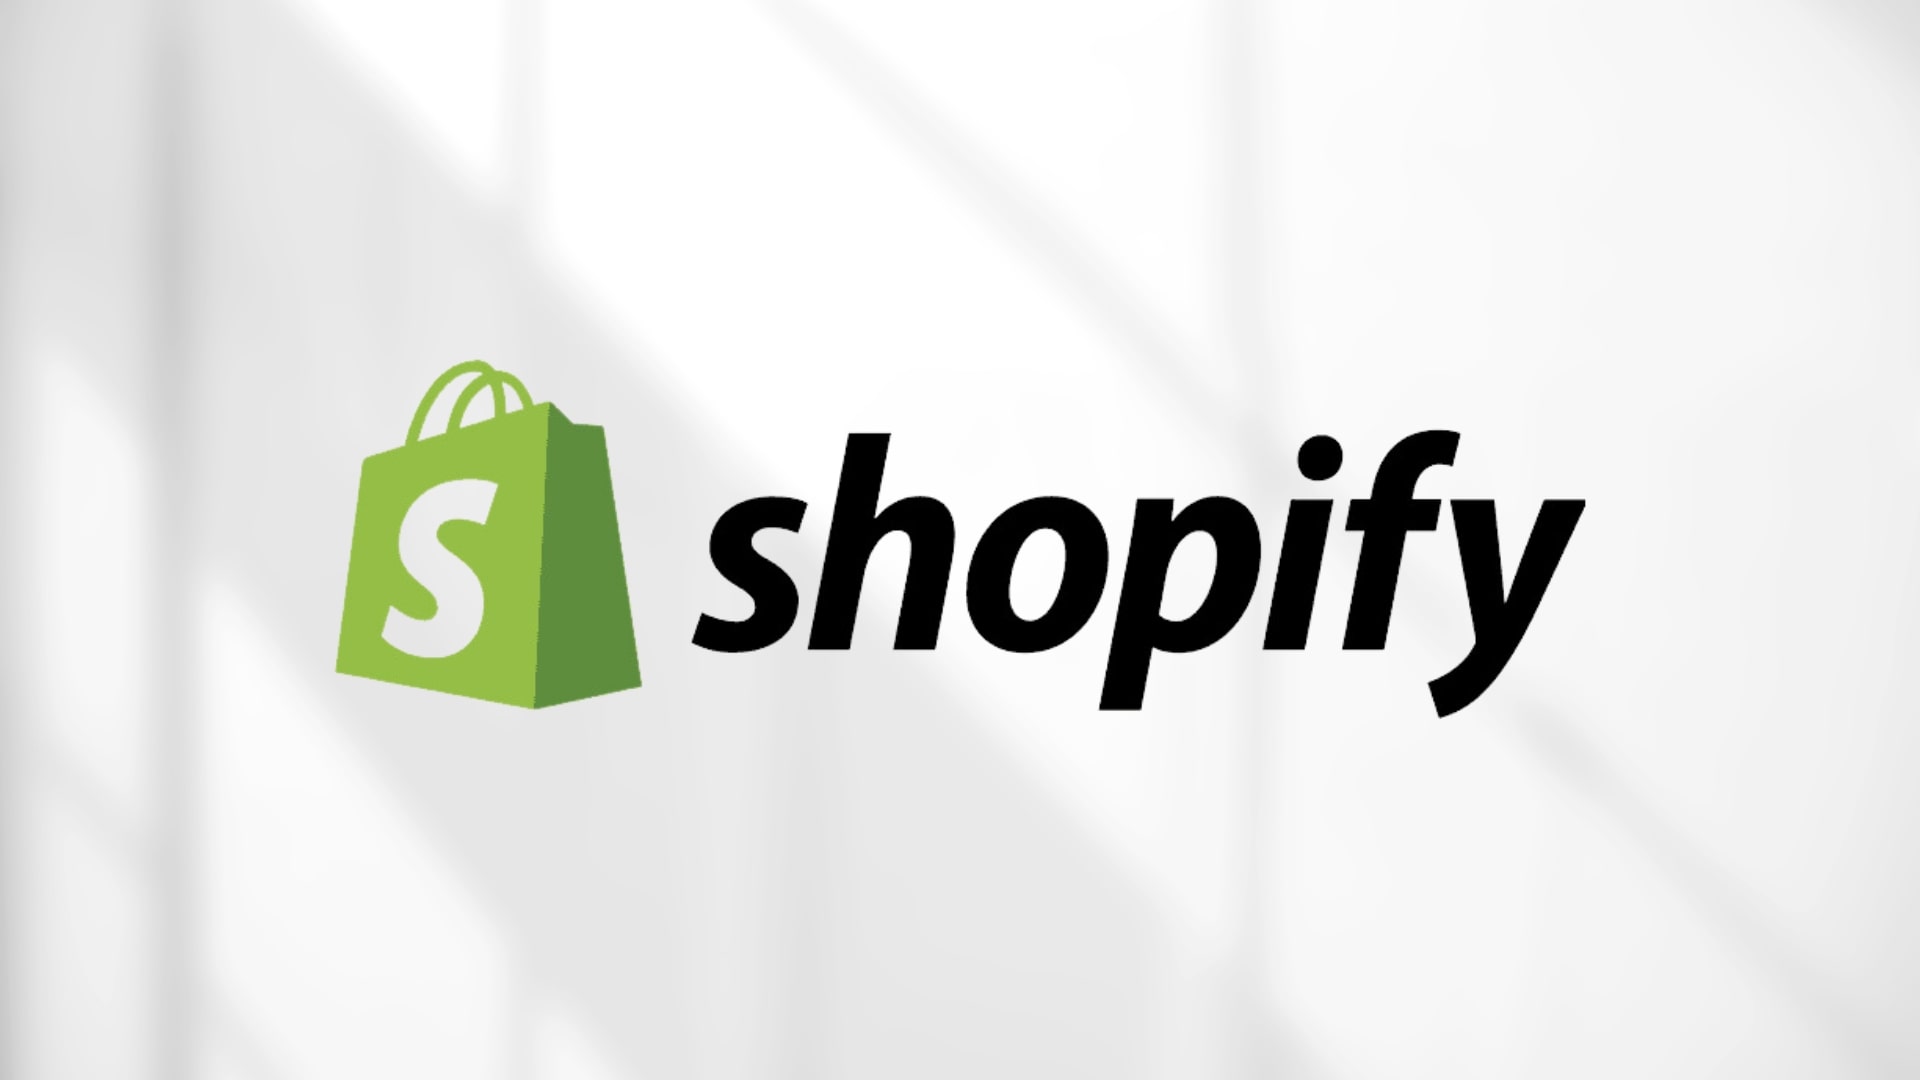 Is a Business License Needed to Sell Products on Shopify?